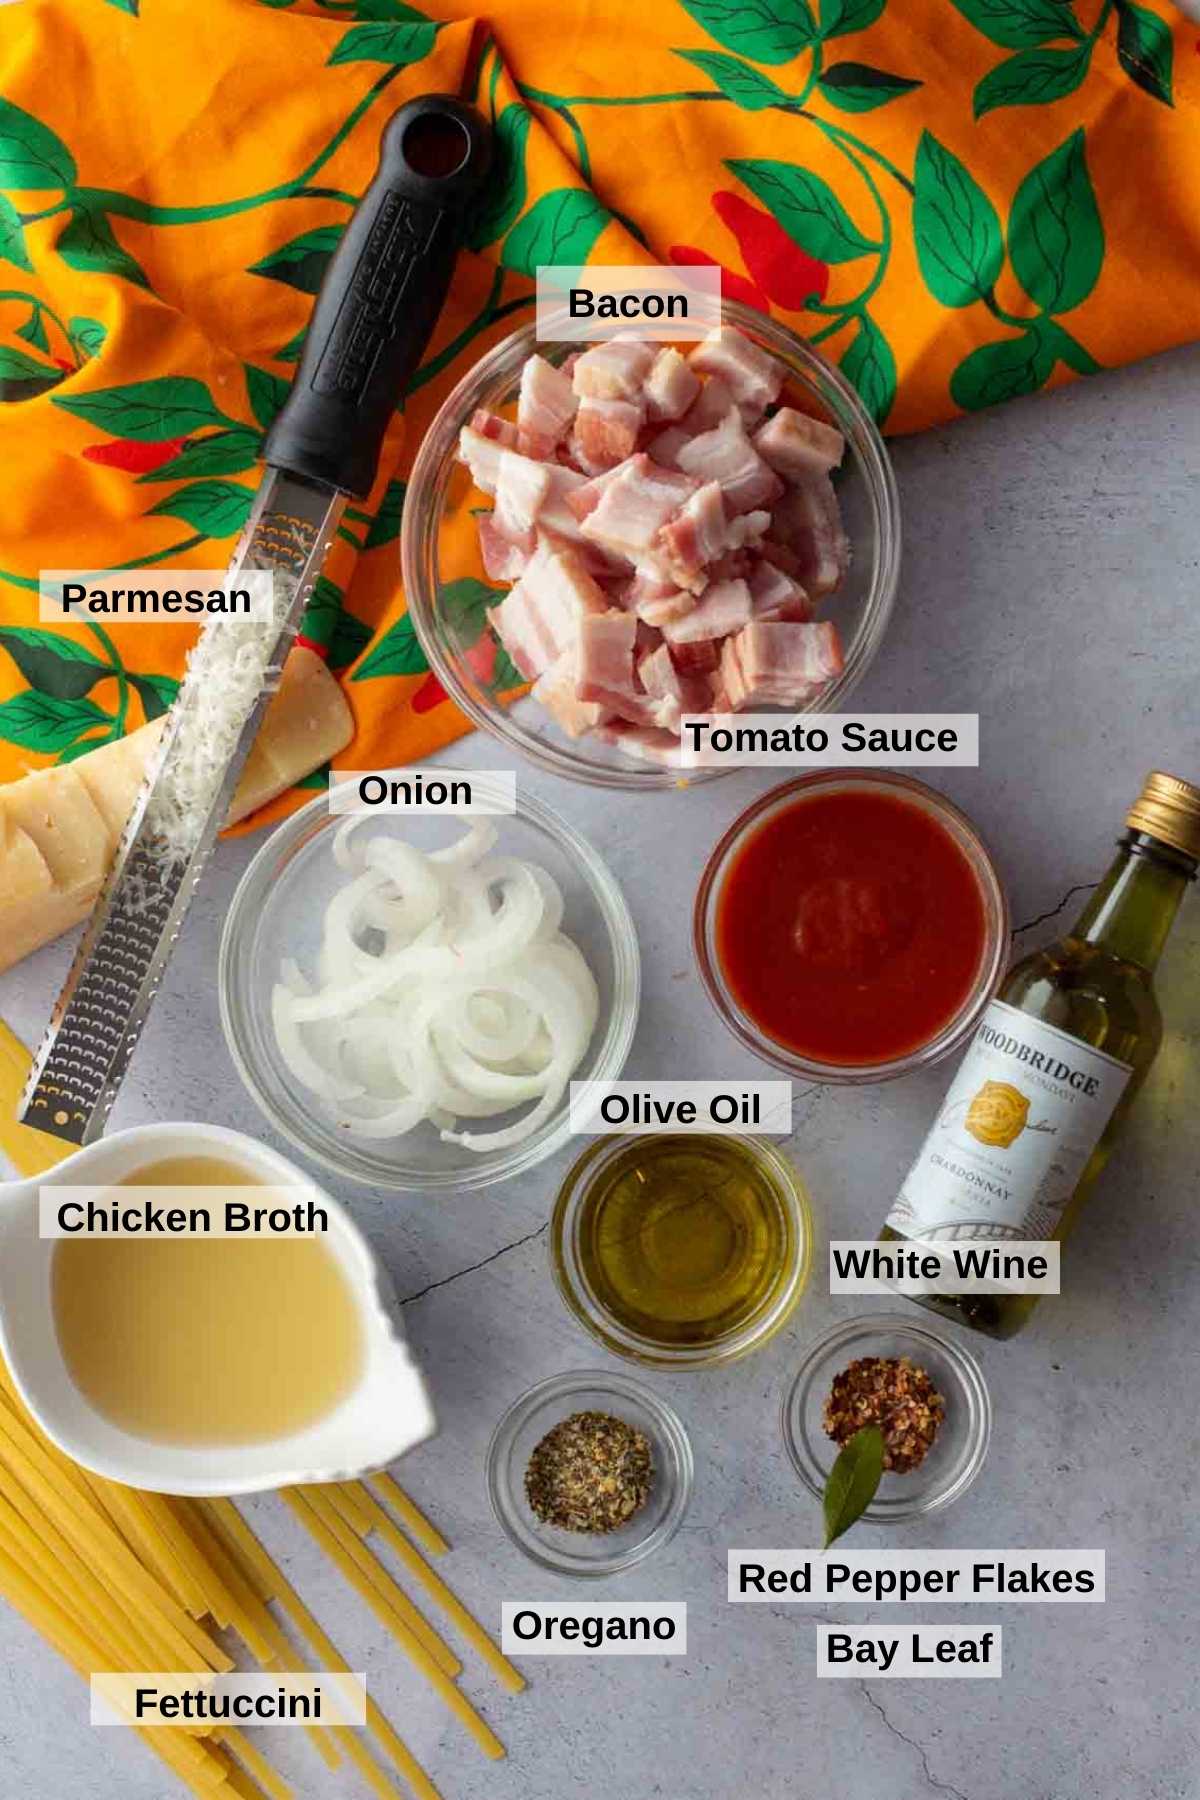 Ingredients to make Fettuccini Amore (Lincoln Highway Pasta)